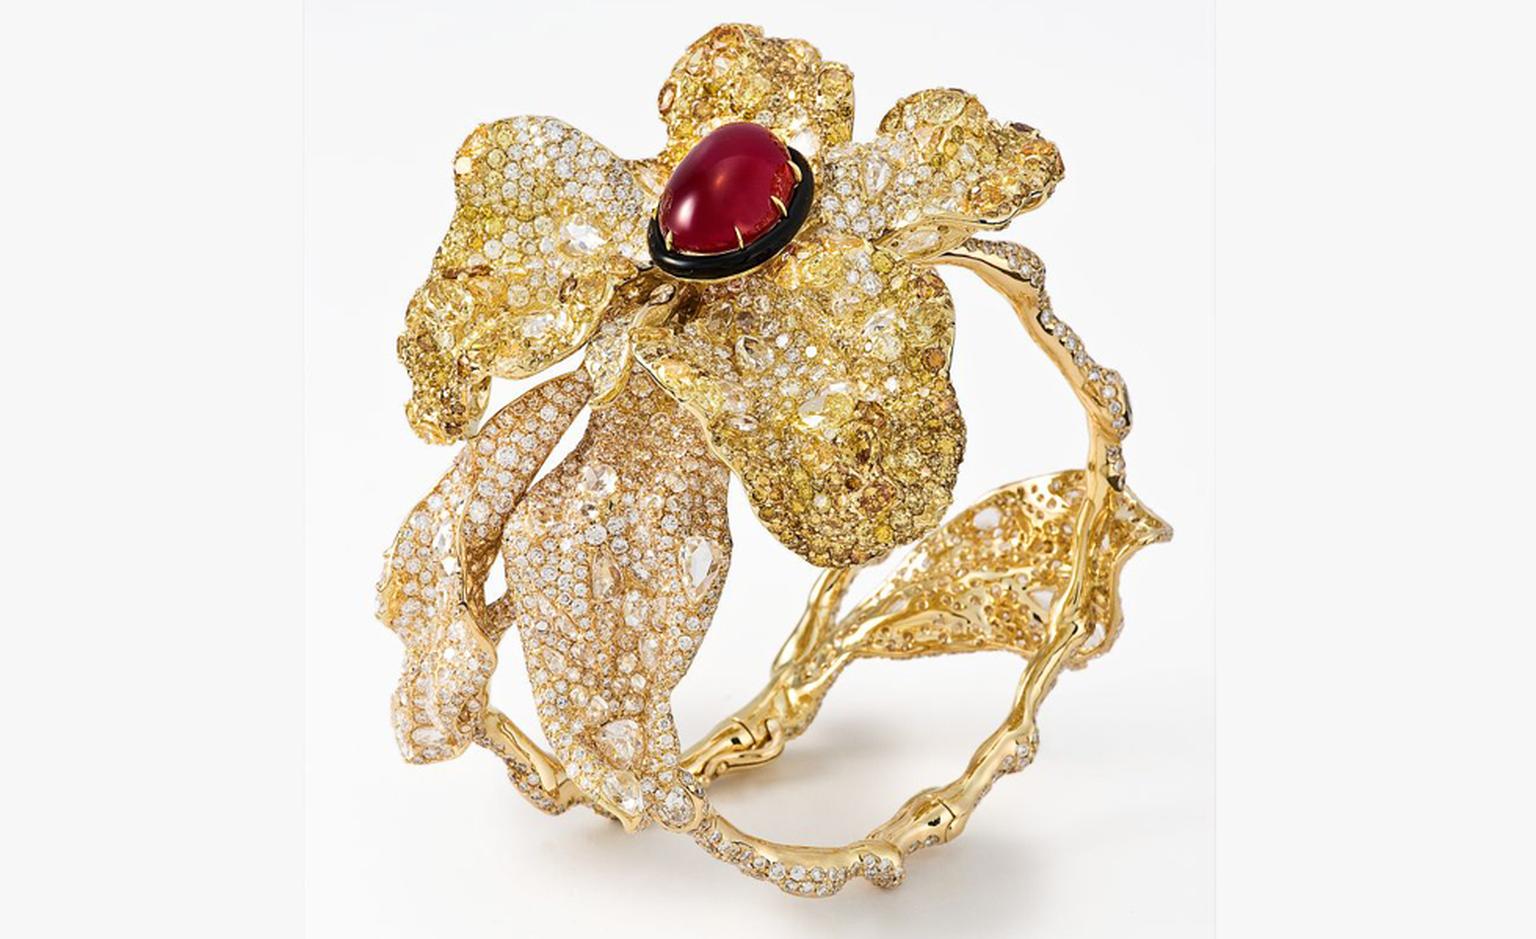 CINDY CHAO, The Art Jewel, White Label Collection Fiery Bangle with cabochon Burma ruby (19.41 cts), surrounded by black onyx highlighted by colorless and yellow diamonds set in 18kt gold. From ?342,000